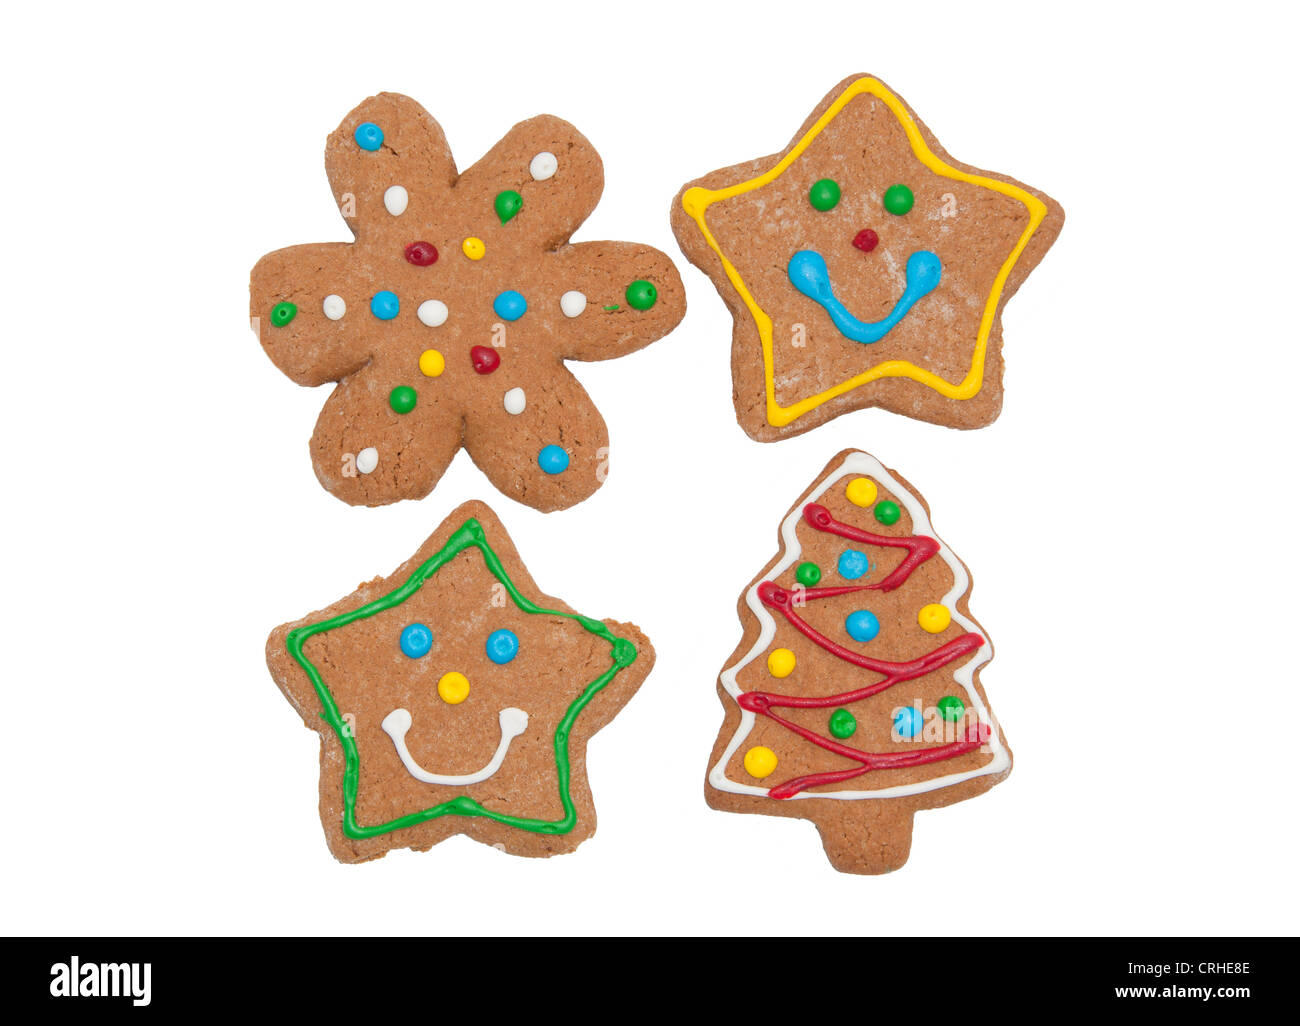 Assortment of colorful gingerbread cookies, on white Stock Photo